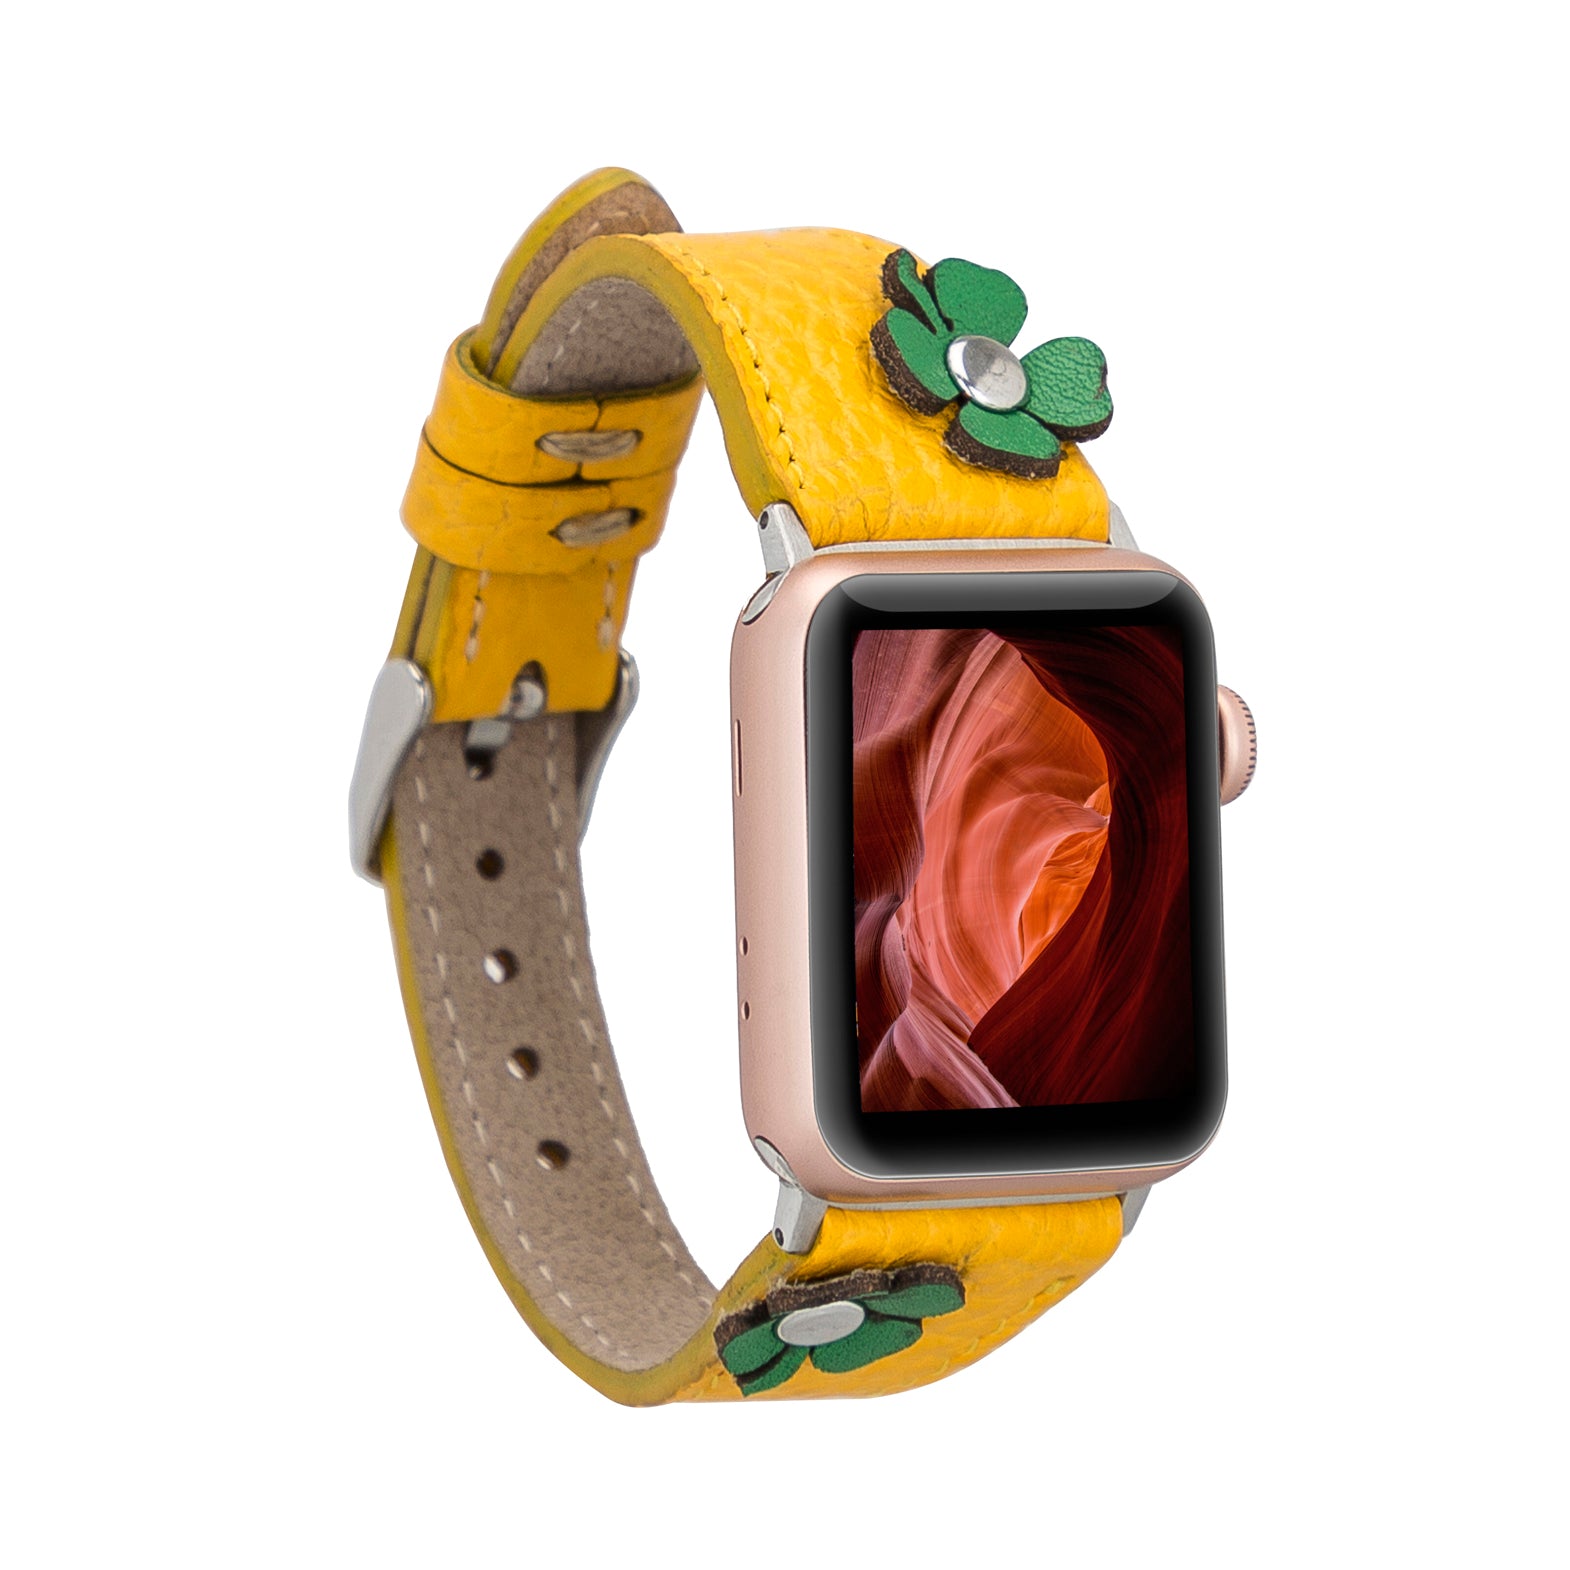 Clover Slim Strap - Full Grain Leather Band for Apple Watch - YELLOW